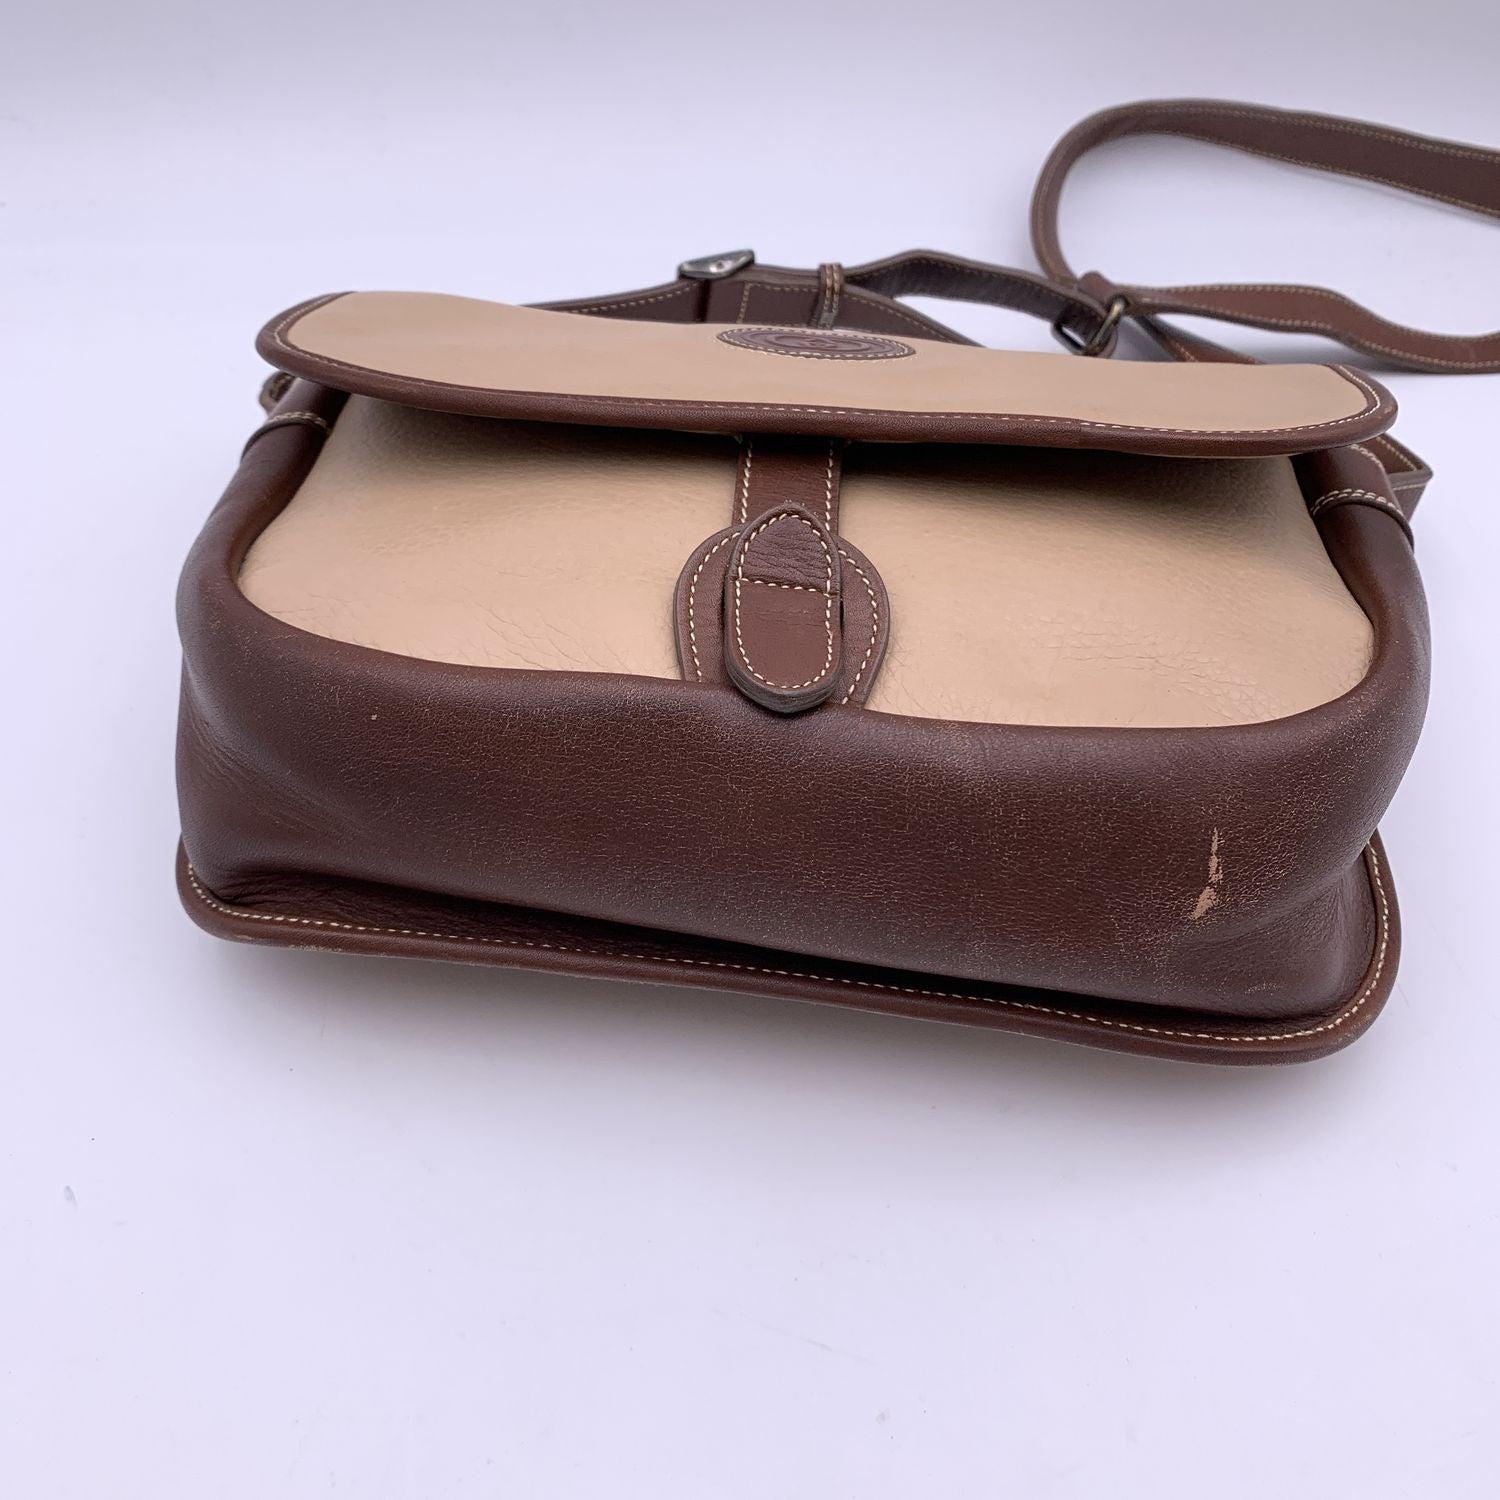 Gucci Vintage Beige and Brown Leather Flap Shoulder Bag In Good Condition For Sale In Rome, Rome